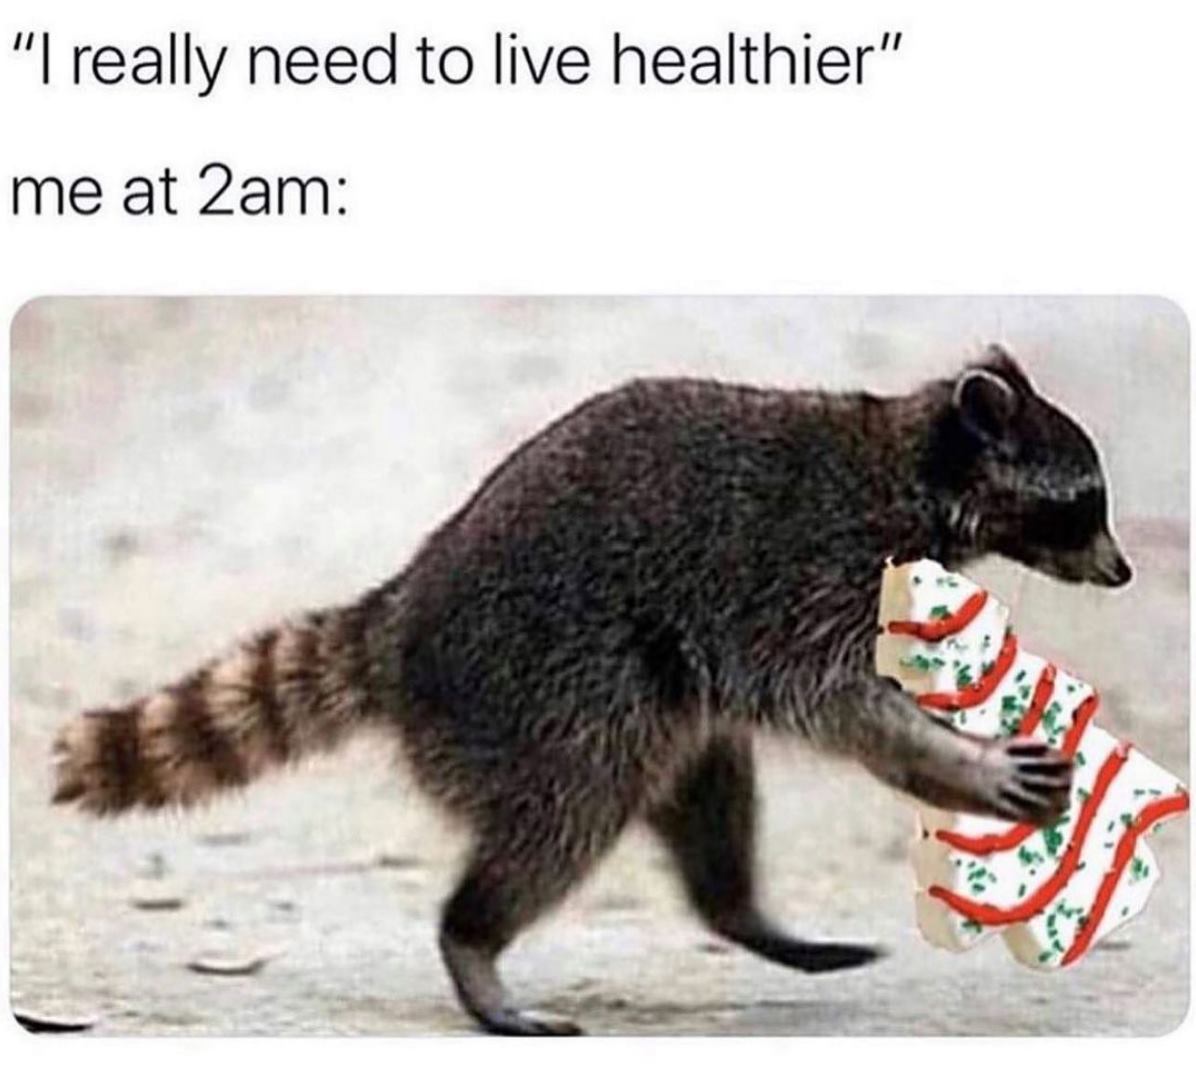 little debbie christmas tree cakes meme - "I really need to live healthier" me at 2am